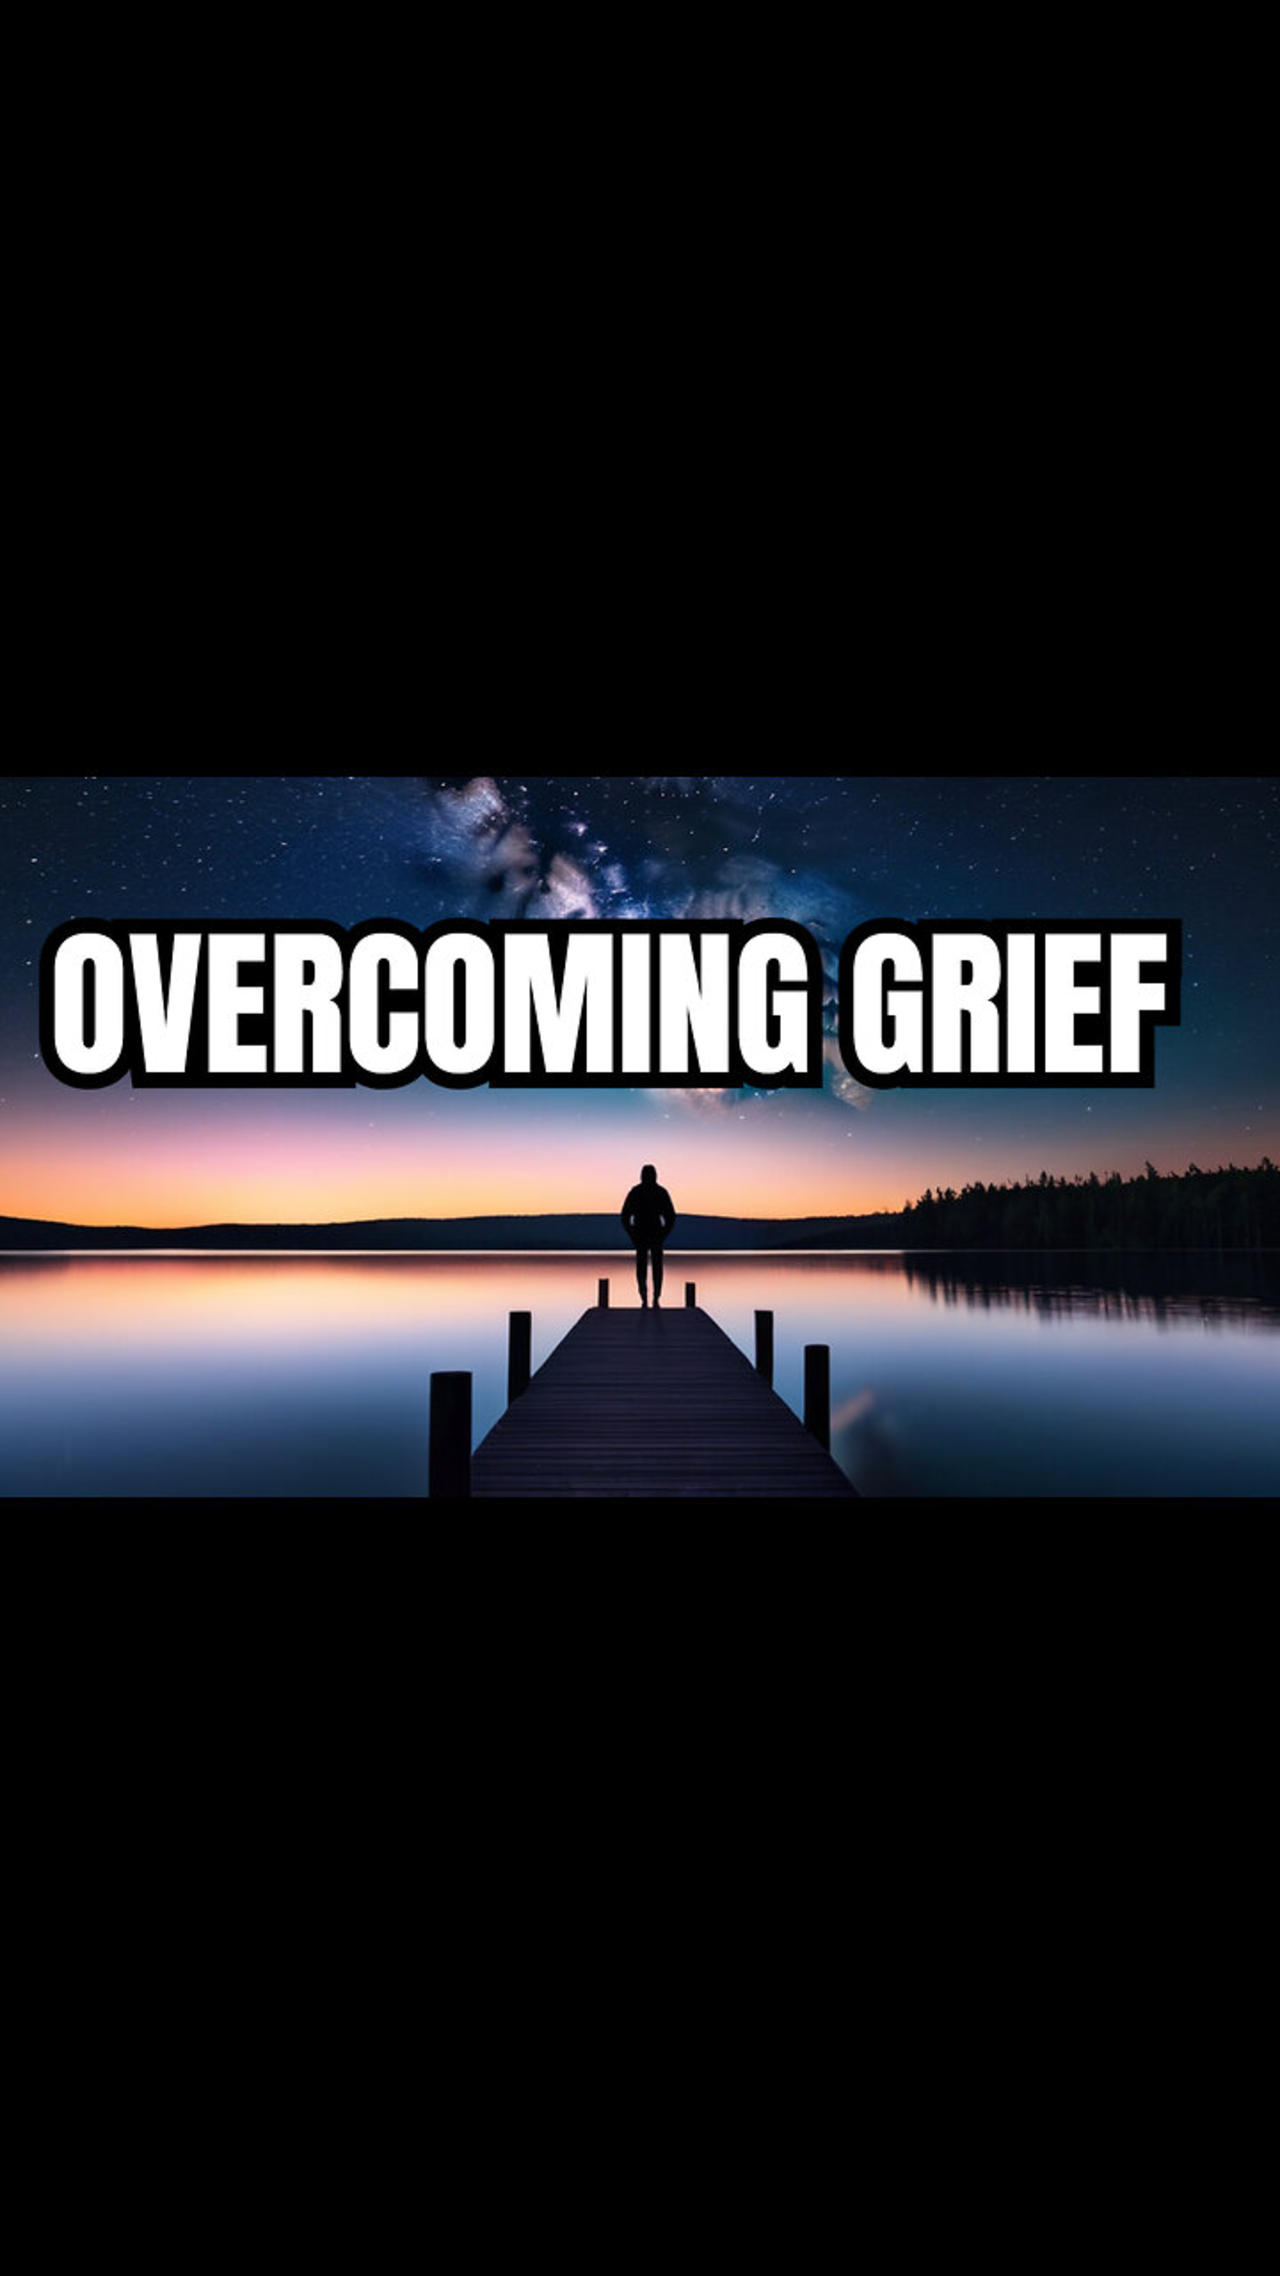 Dealing with Loss and Grief